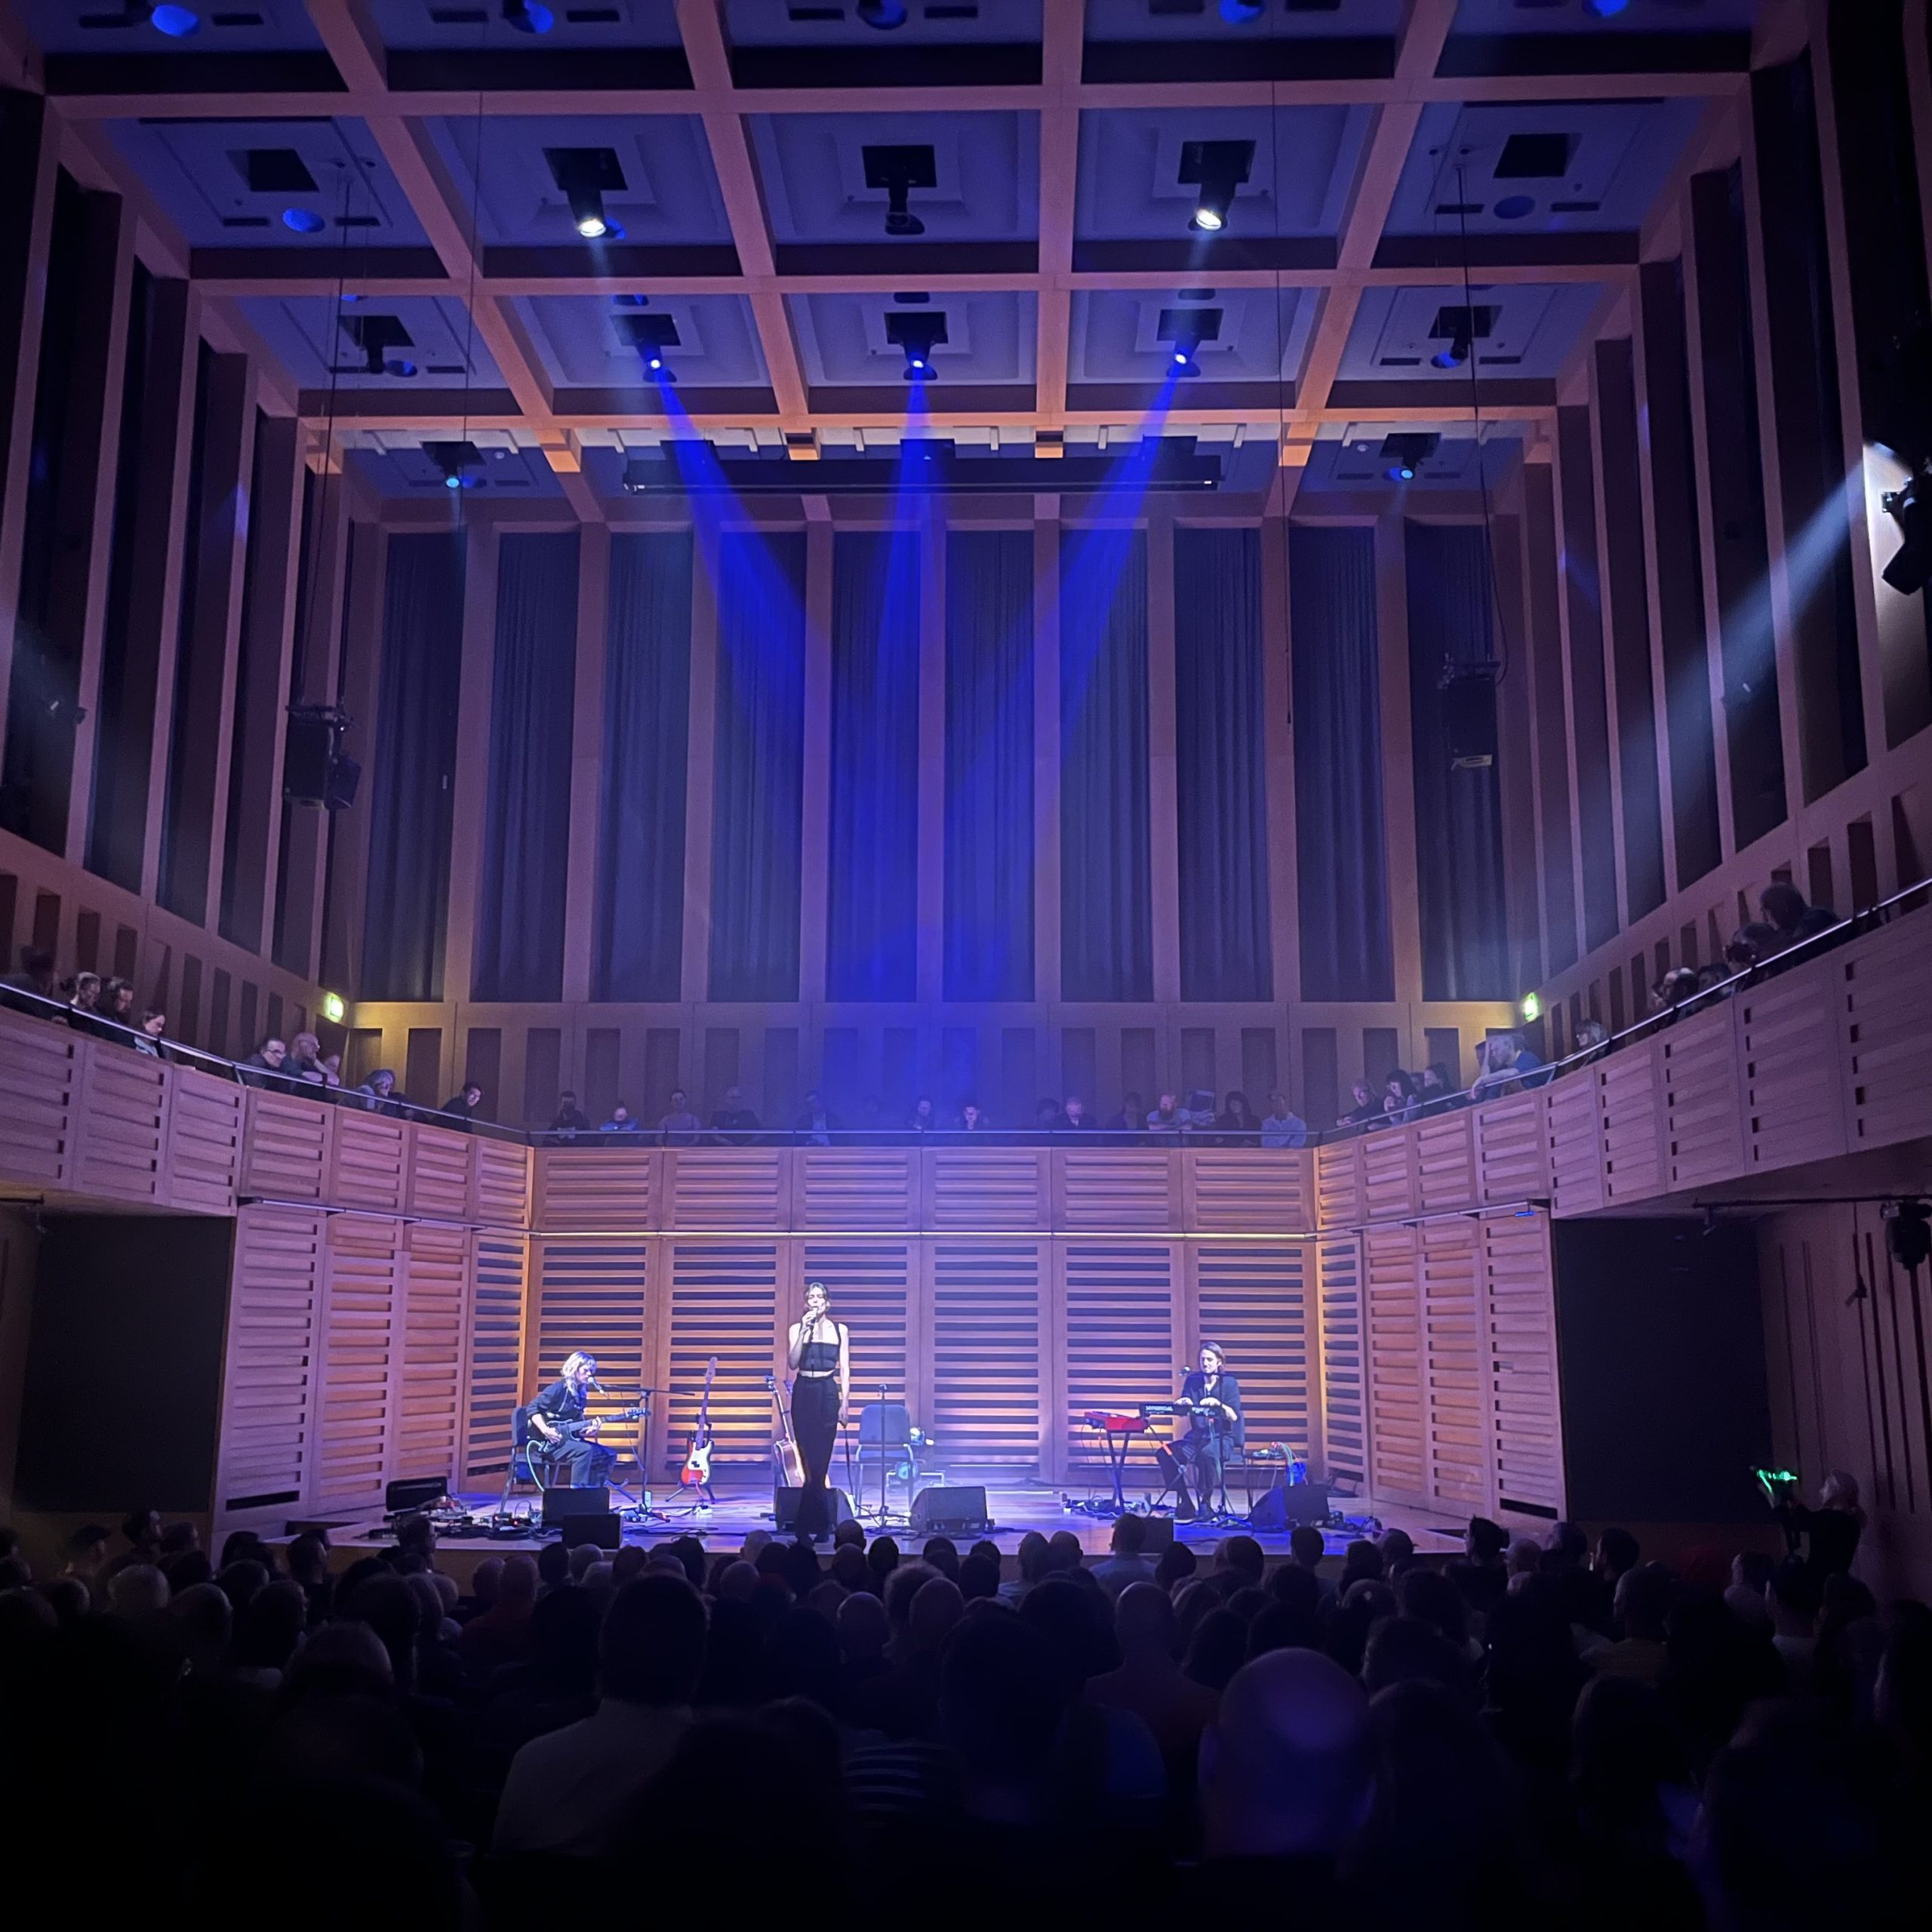 The beautiful Kings Place in London on Wednesday night